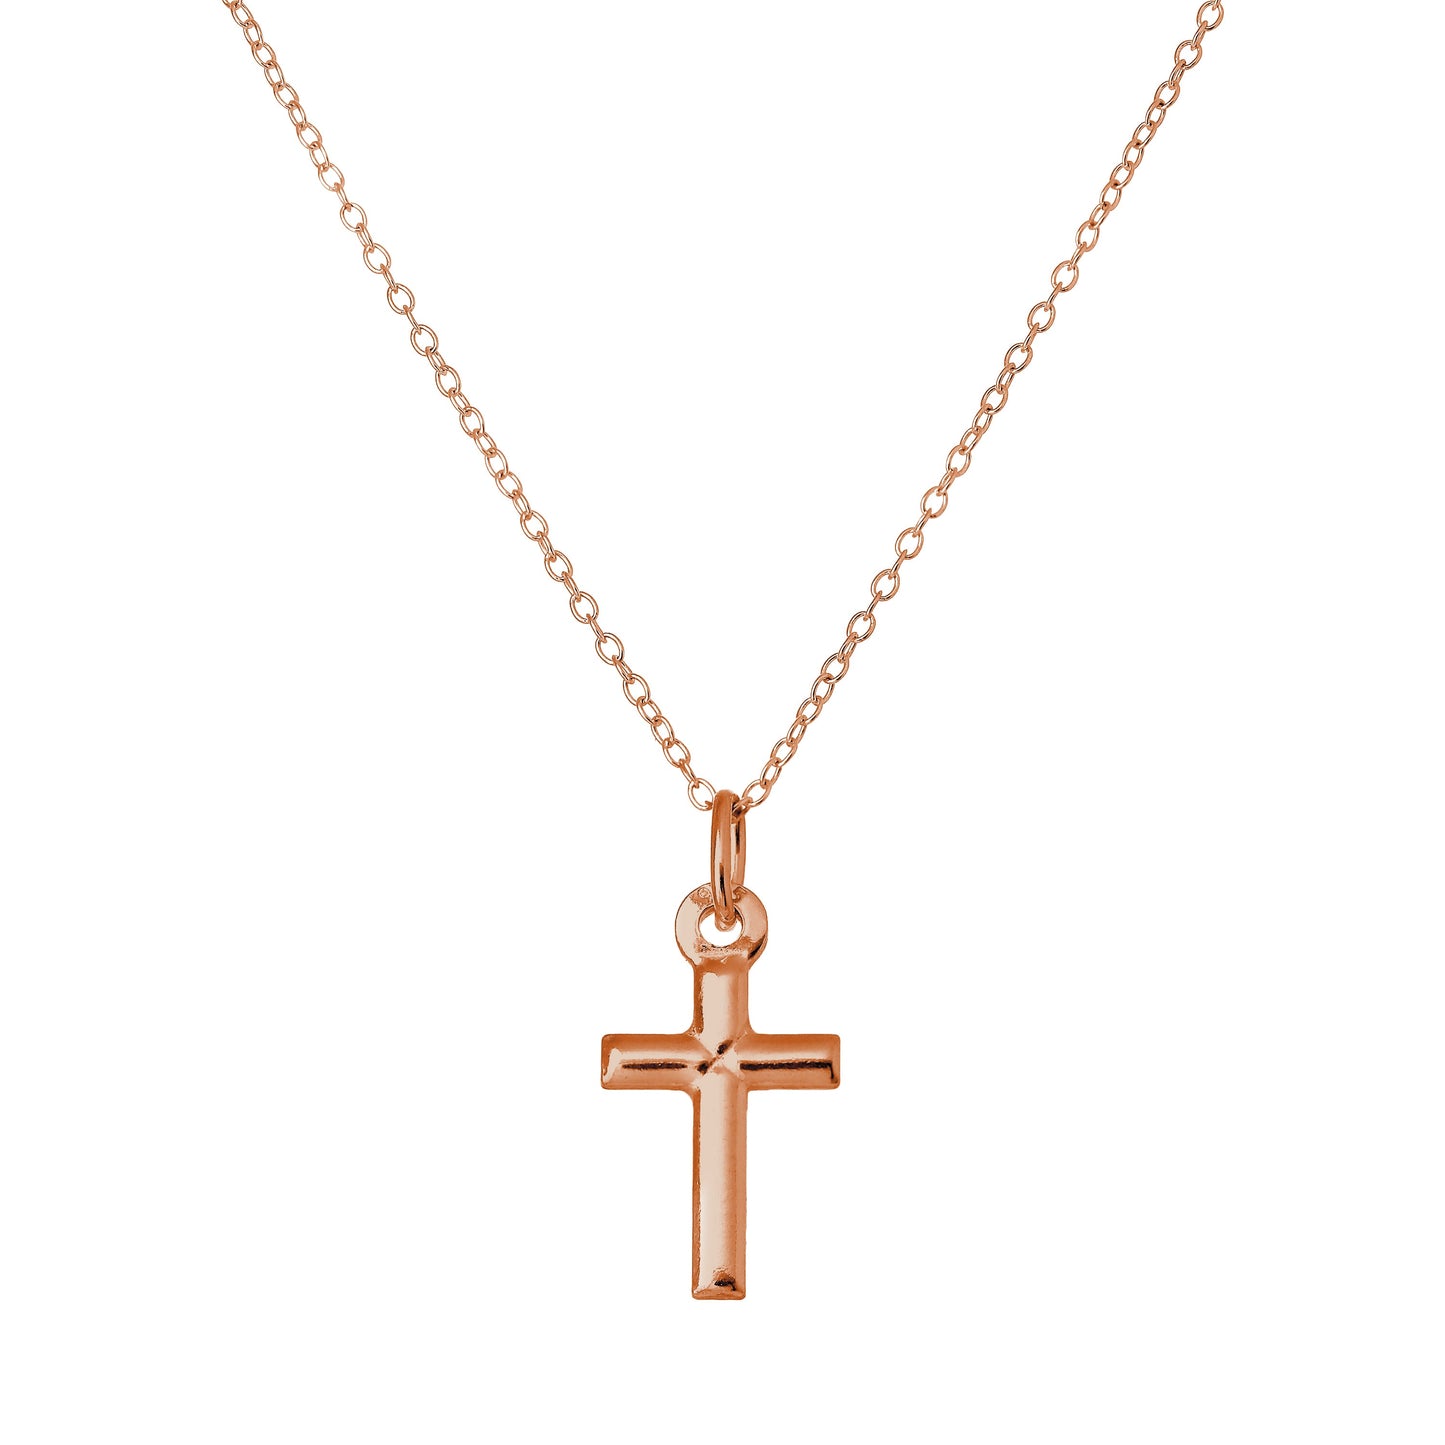 Rose Gold Plated Sterling Silver Cross Necklace 18 Inches